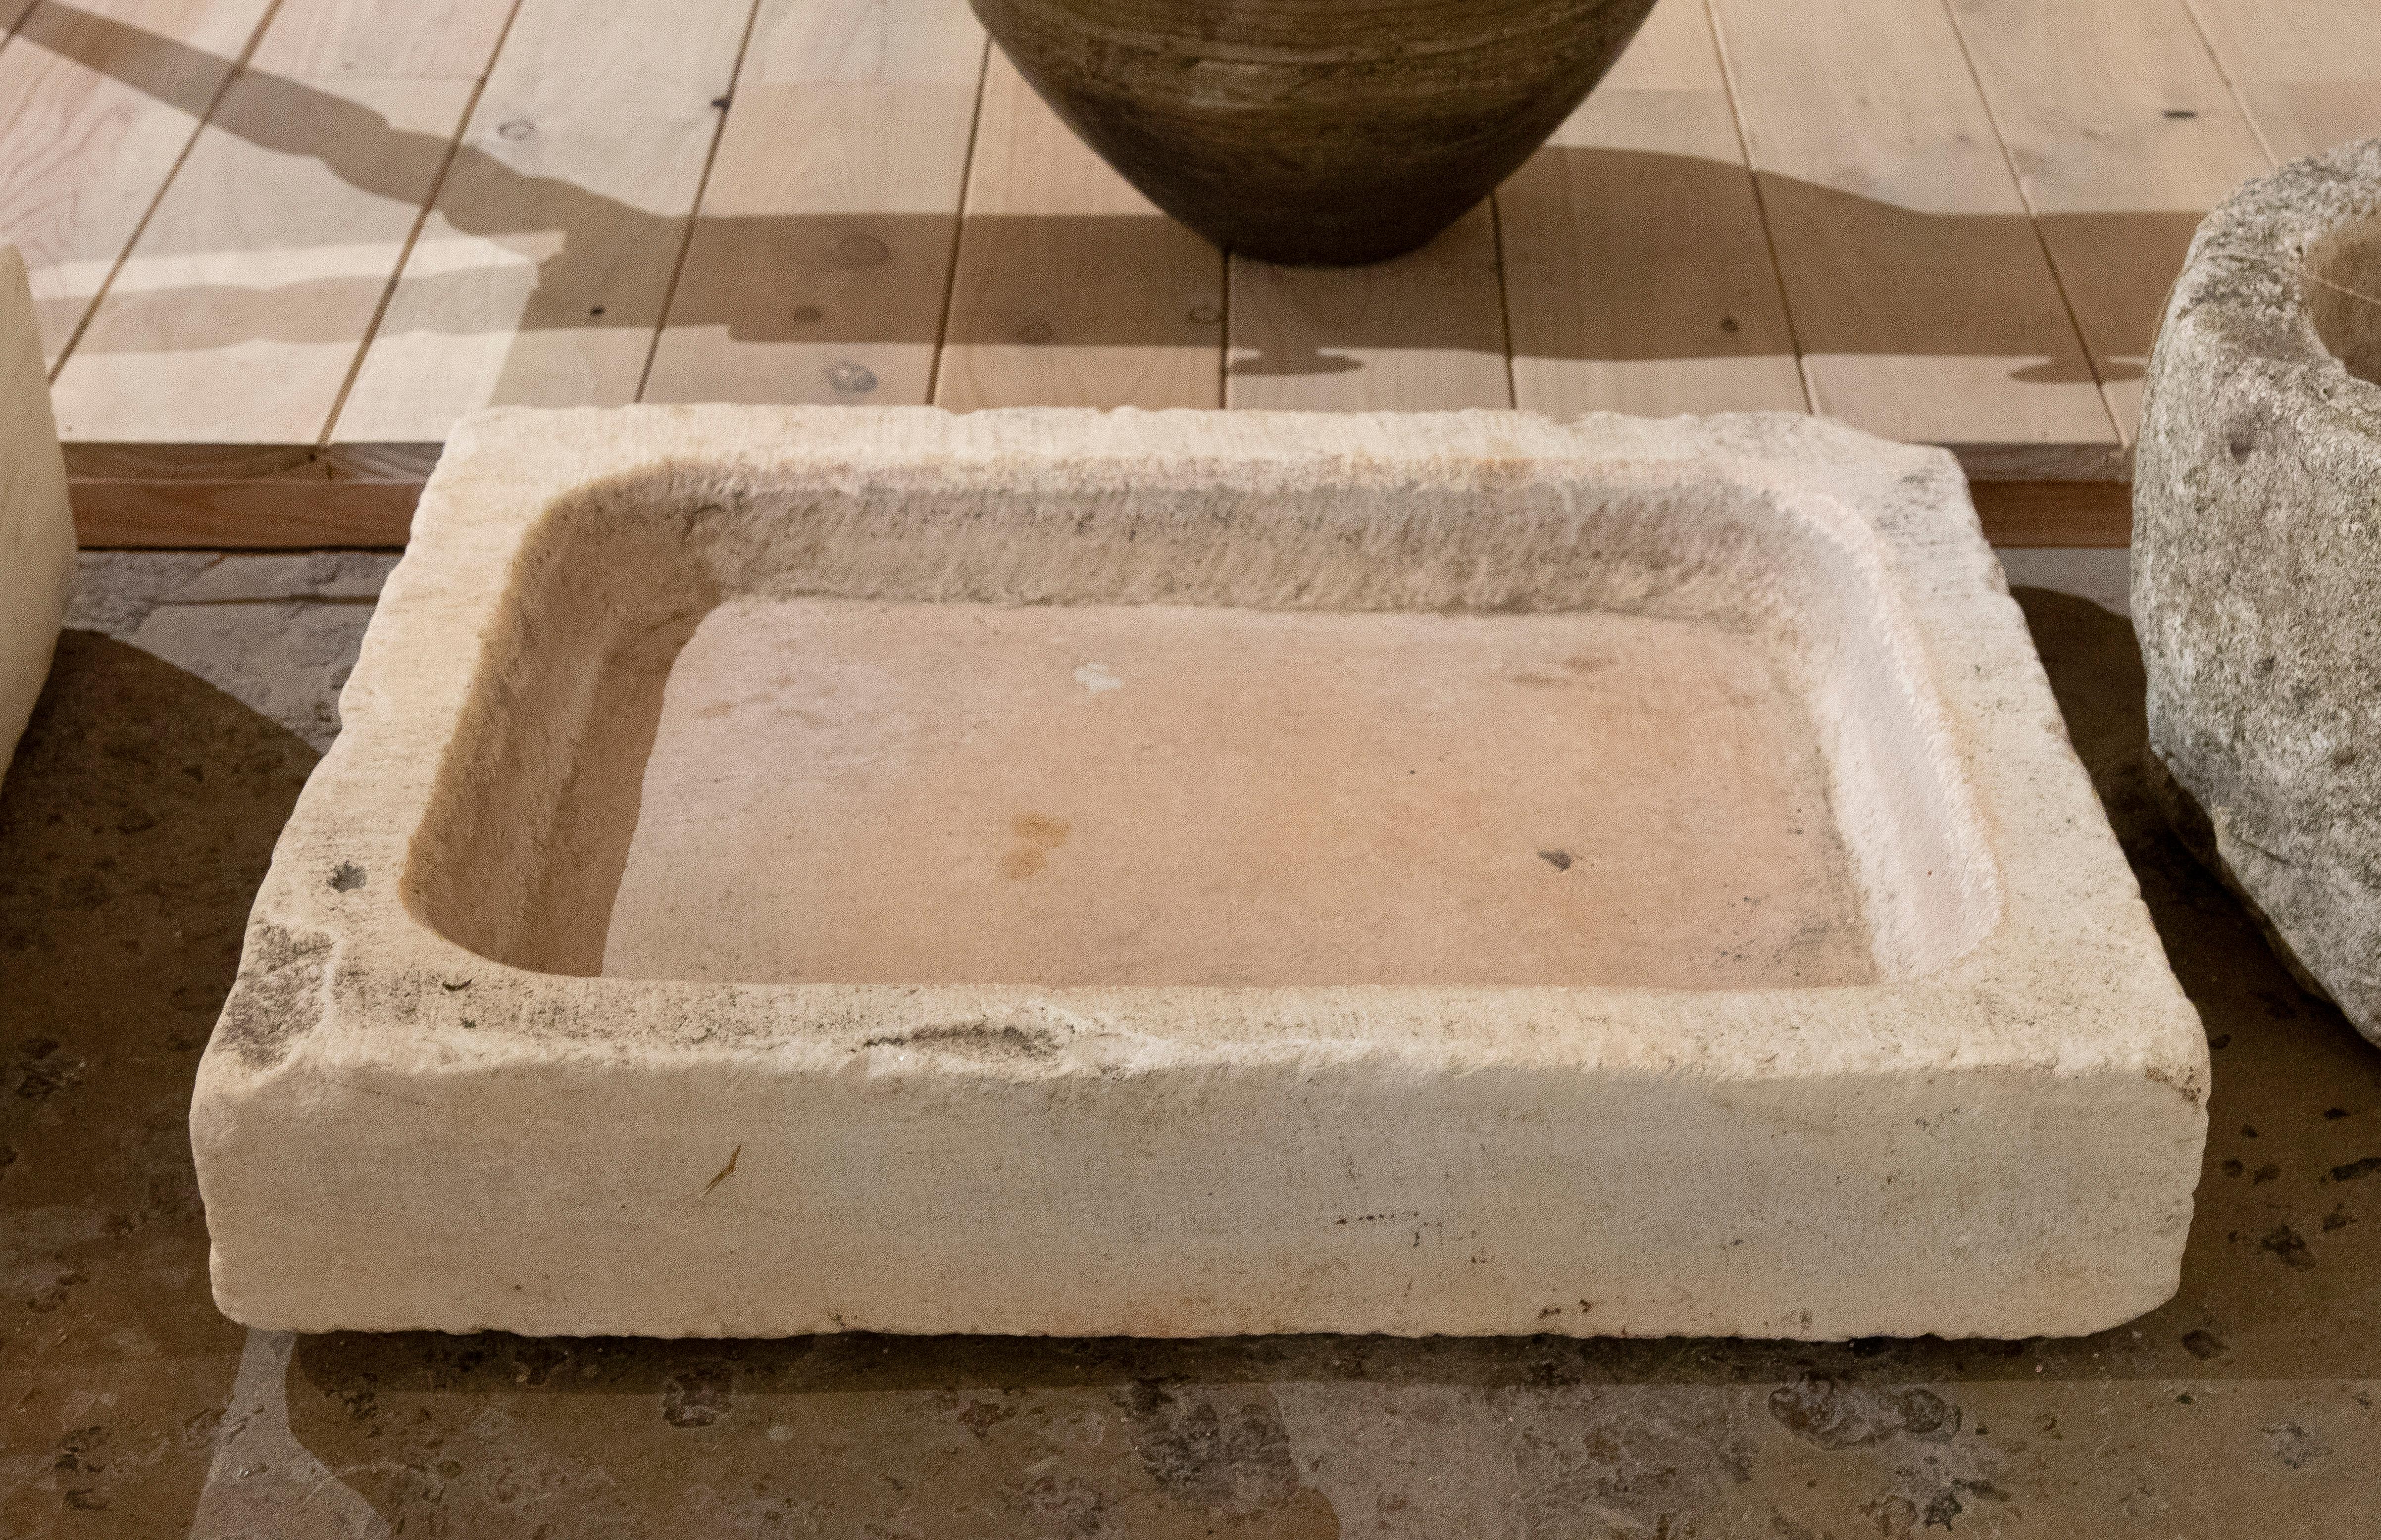 19th Century hand-carved marble wash basin.